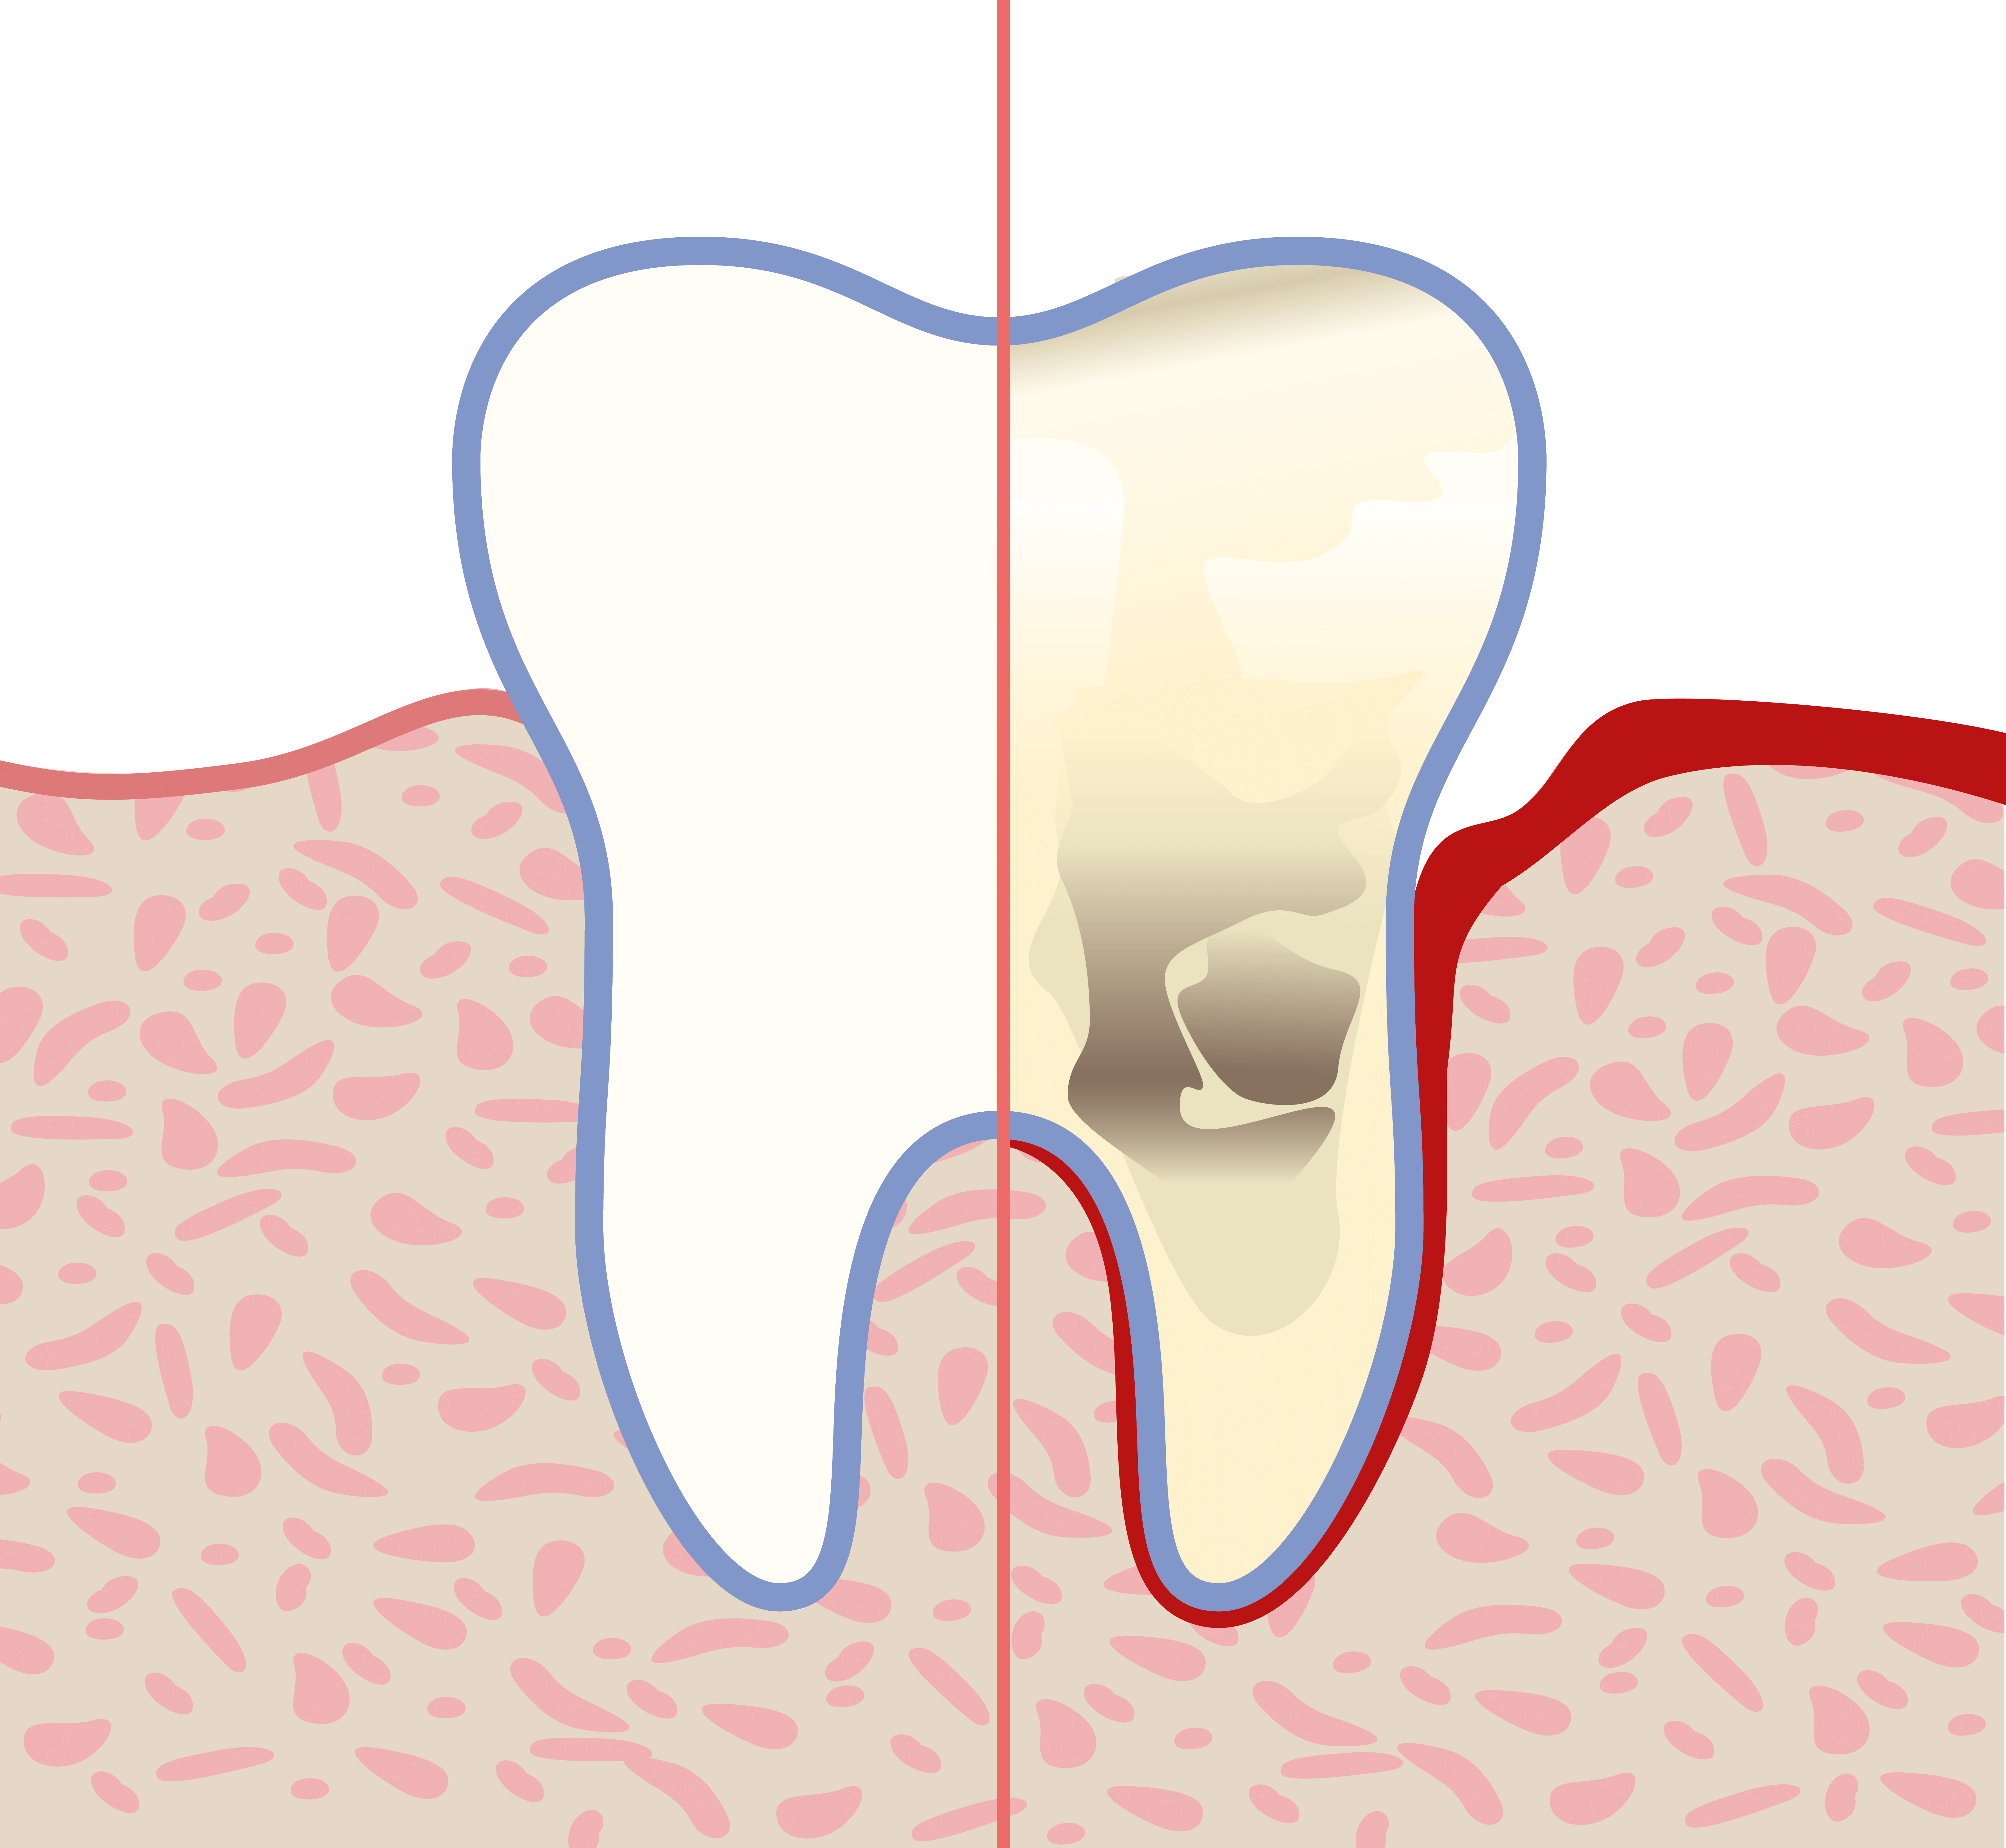 Plaque as a cause of gum inflammation